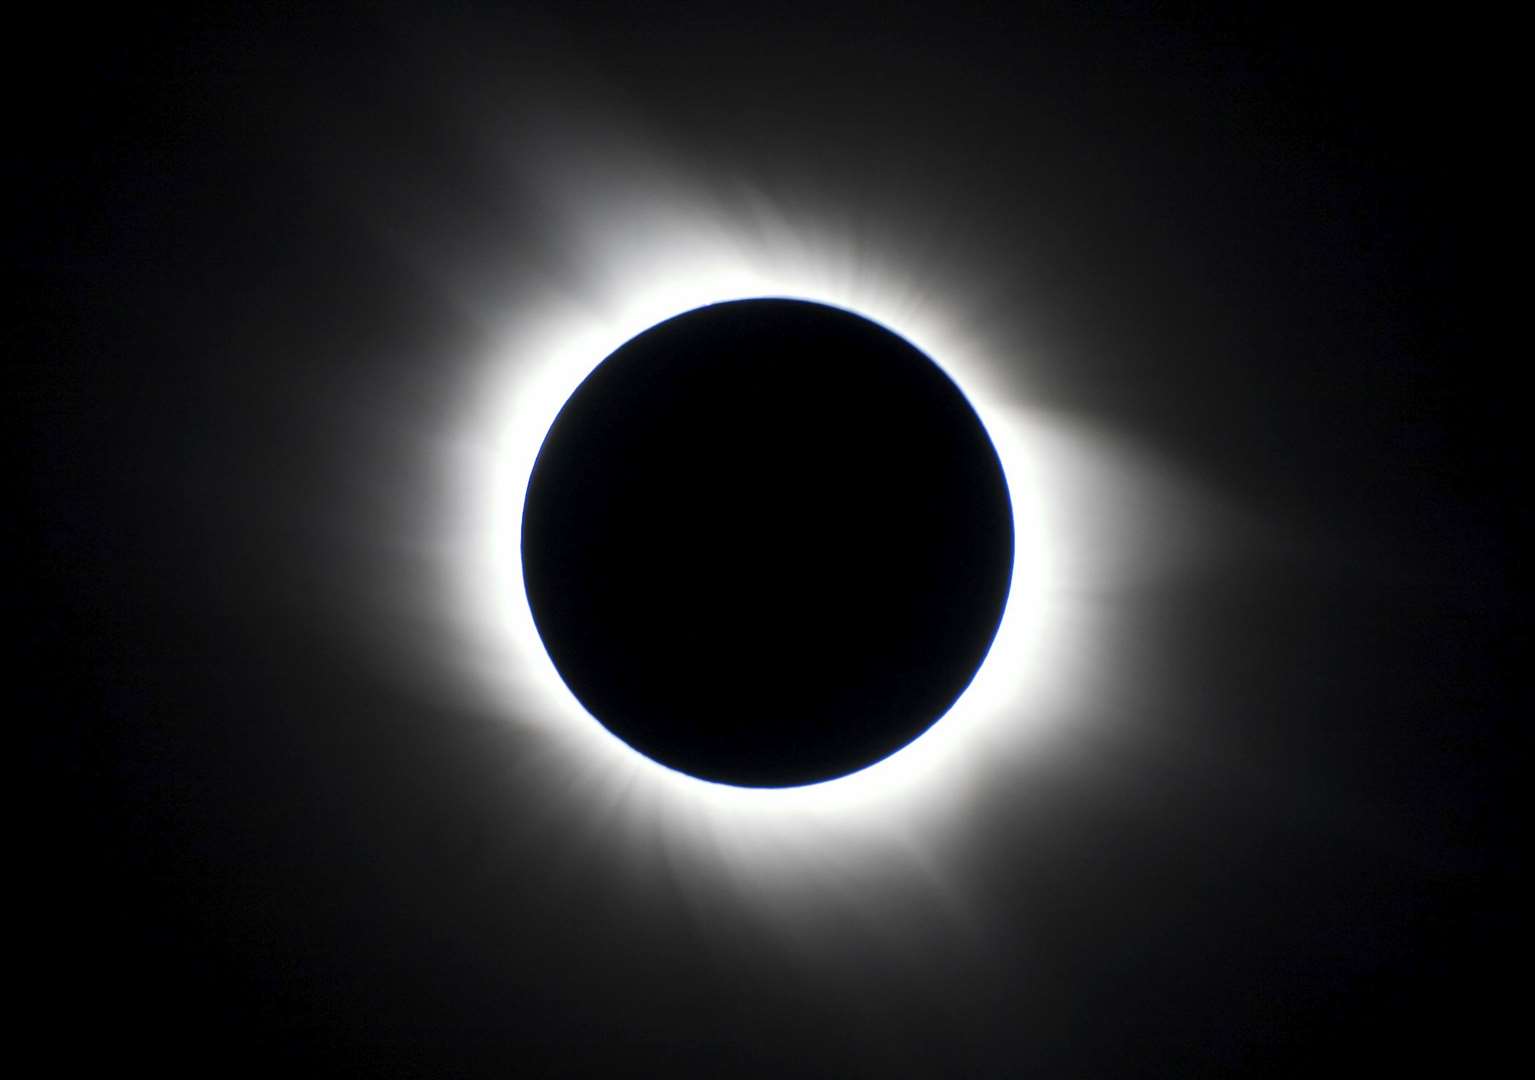 The total eclipse was dramatic - and most of us will never see its like again